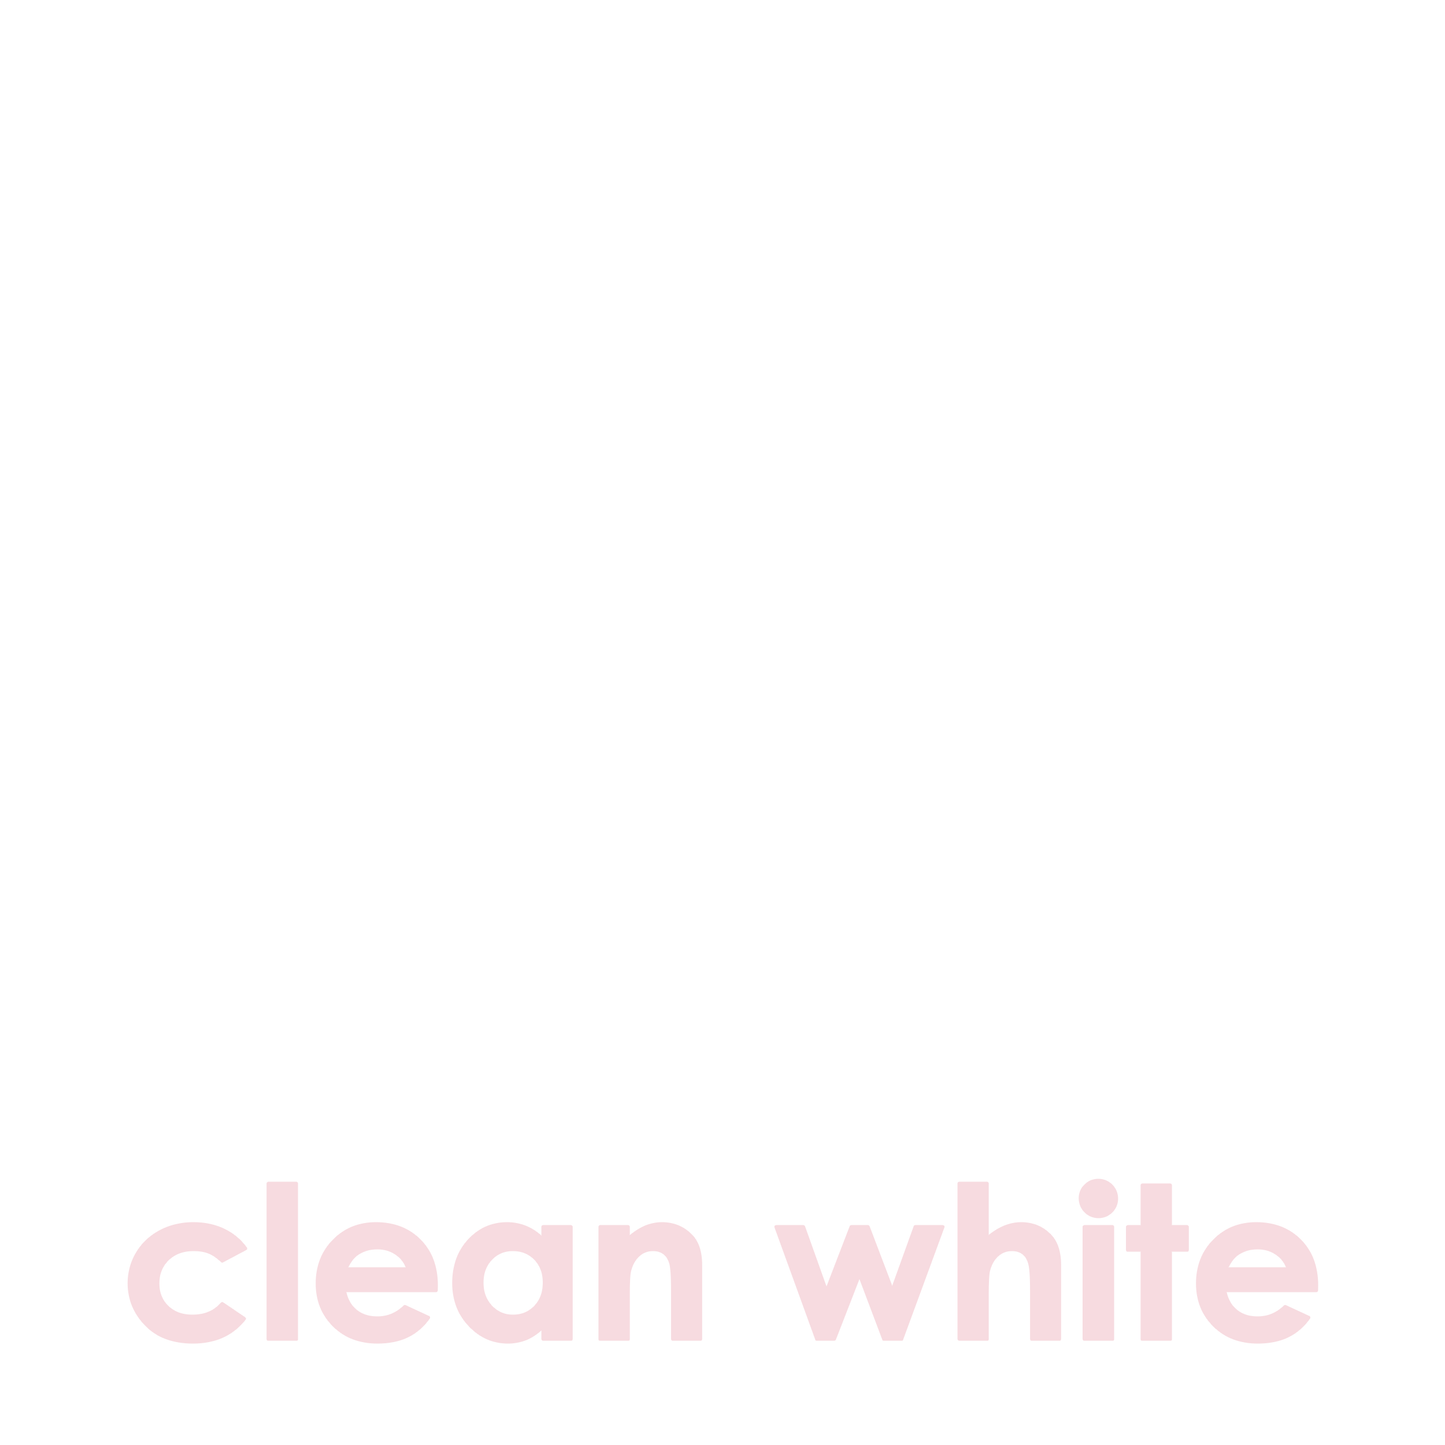 White background with pink text that reads "clean white".